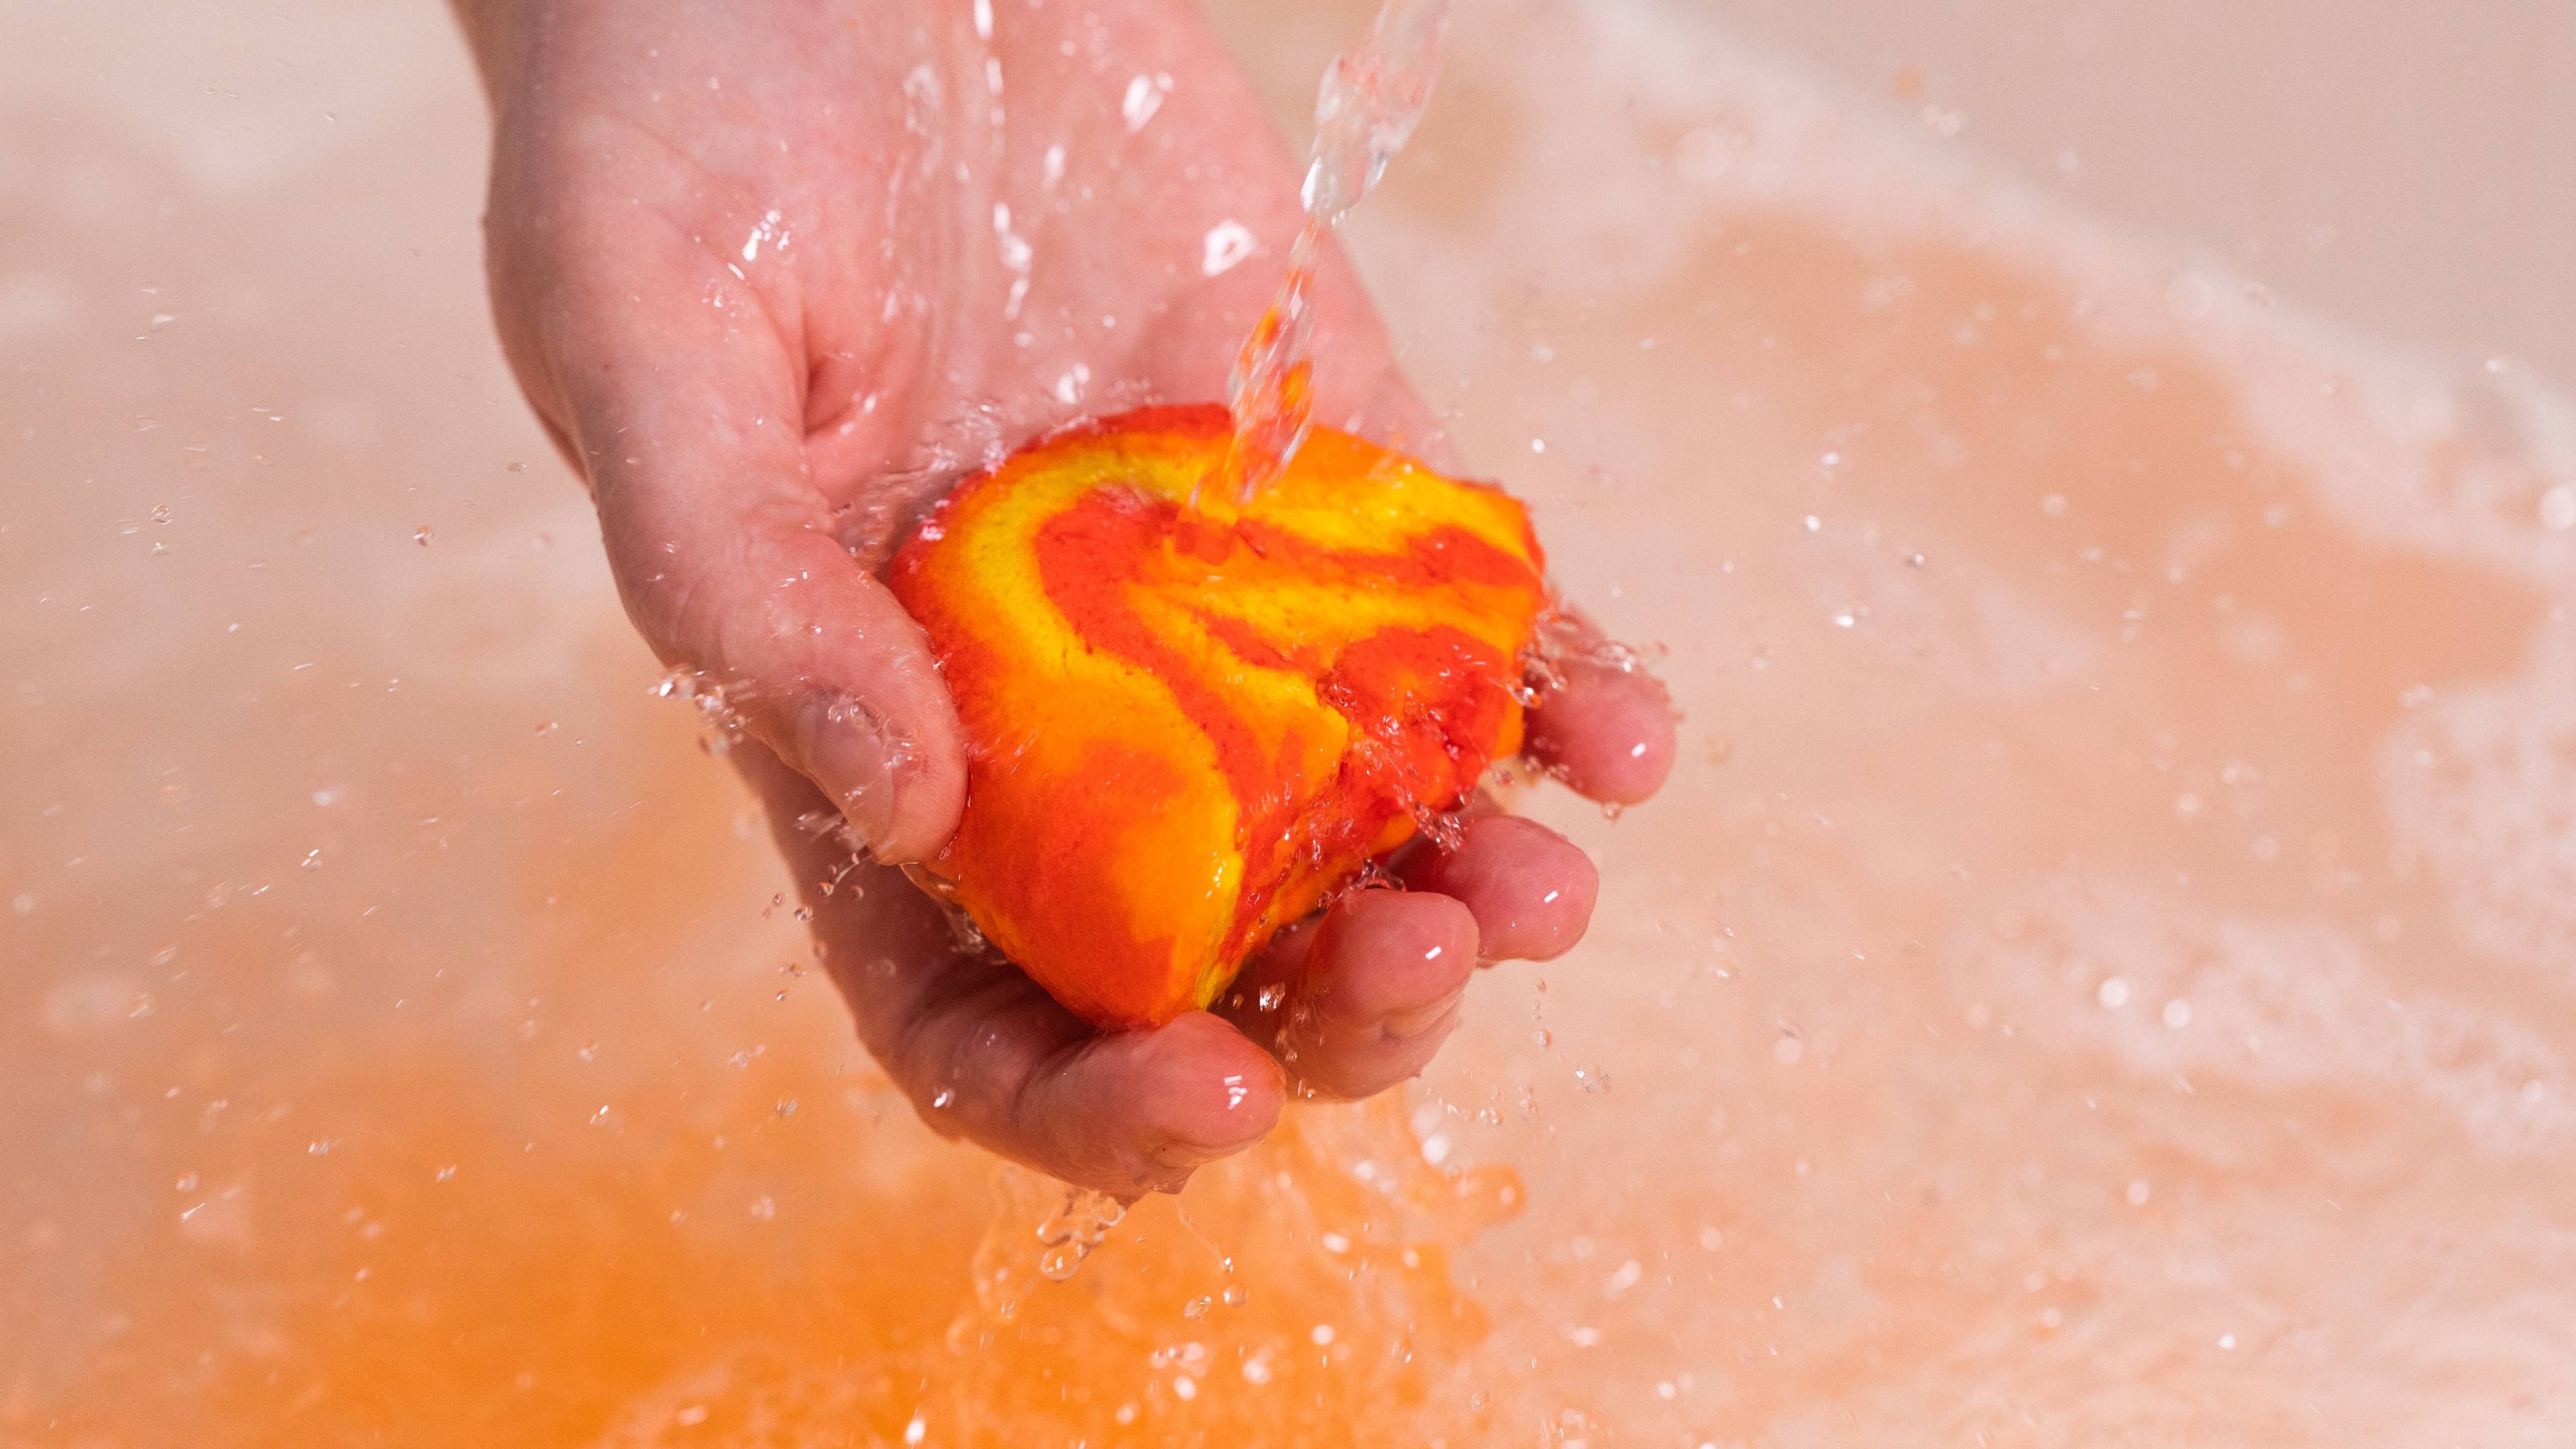 The image shows the model's hand under running water as they hold half of the Brightside bubble bar to create a warm orange bath with thick white bubbles below. 